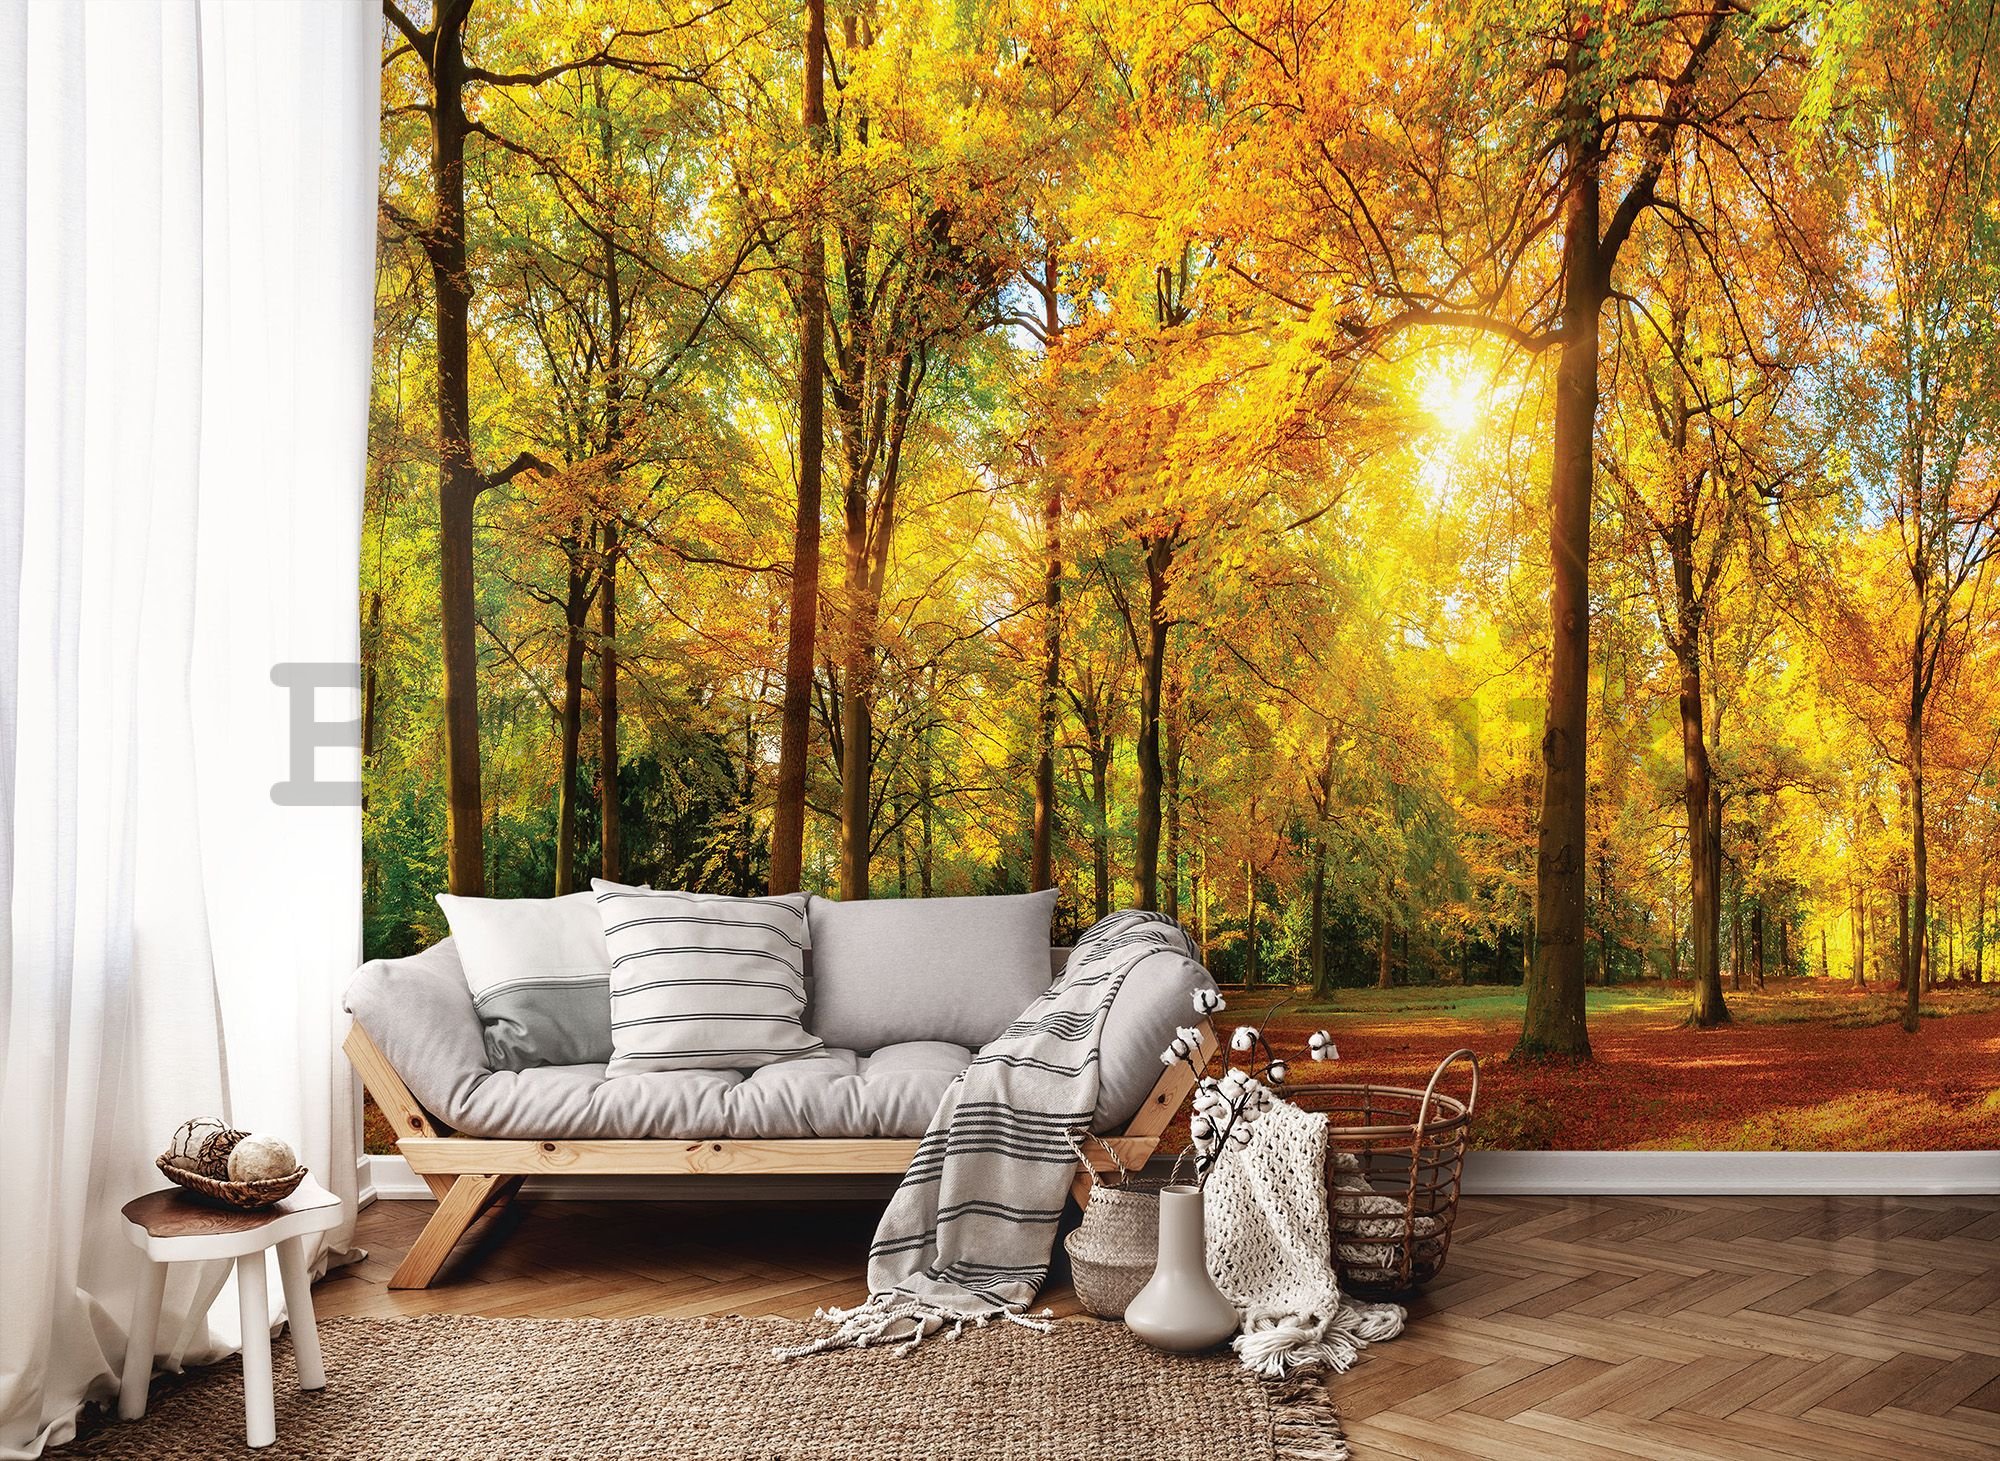 Wall mural vlies: Fallen leaves in the forest - 254x368 cm